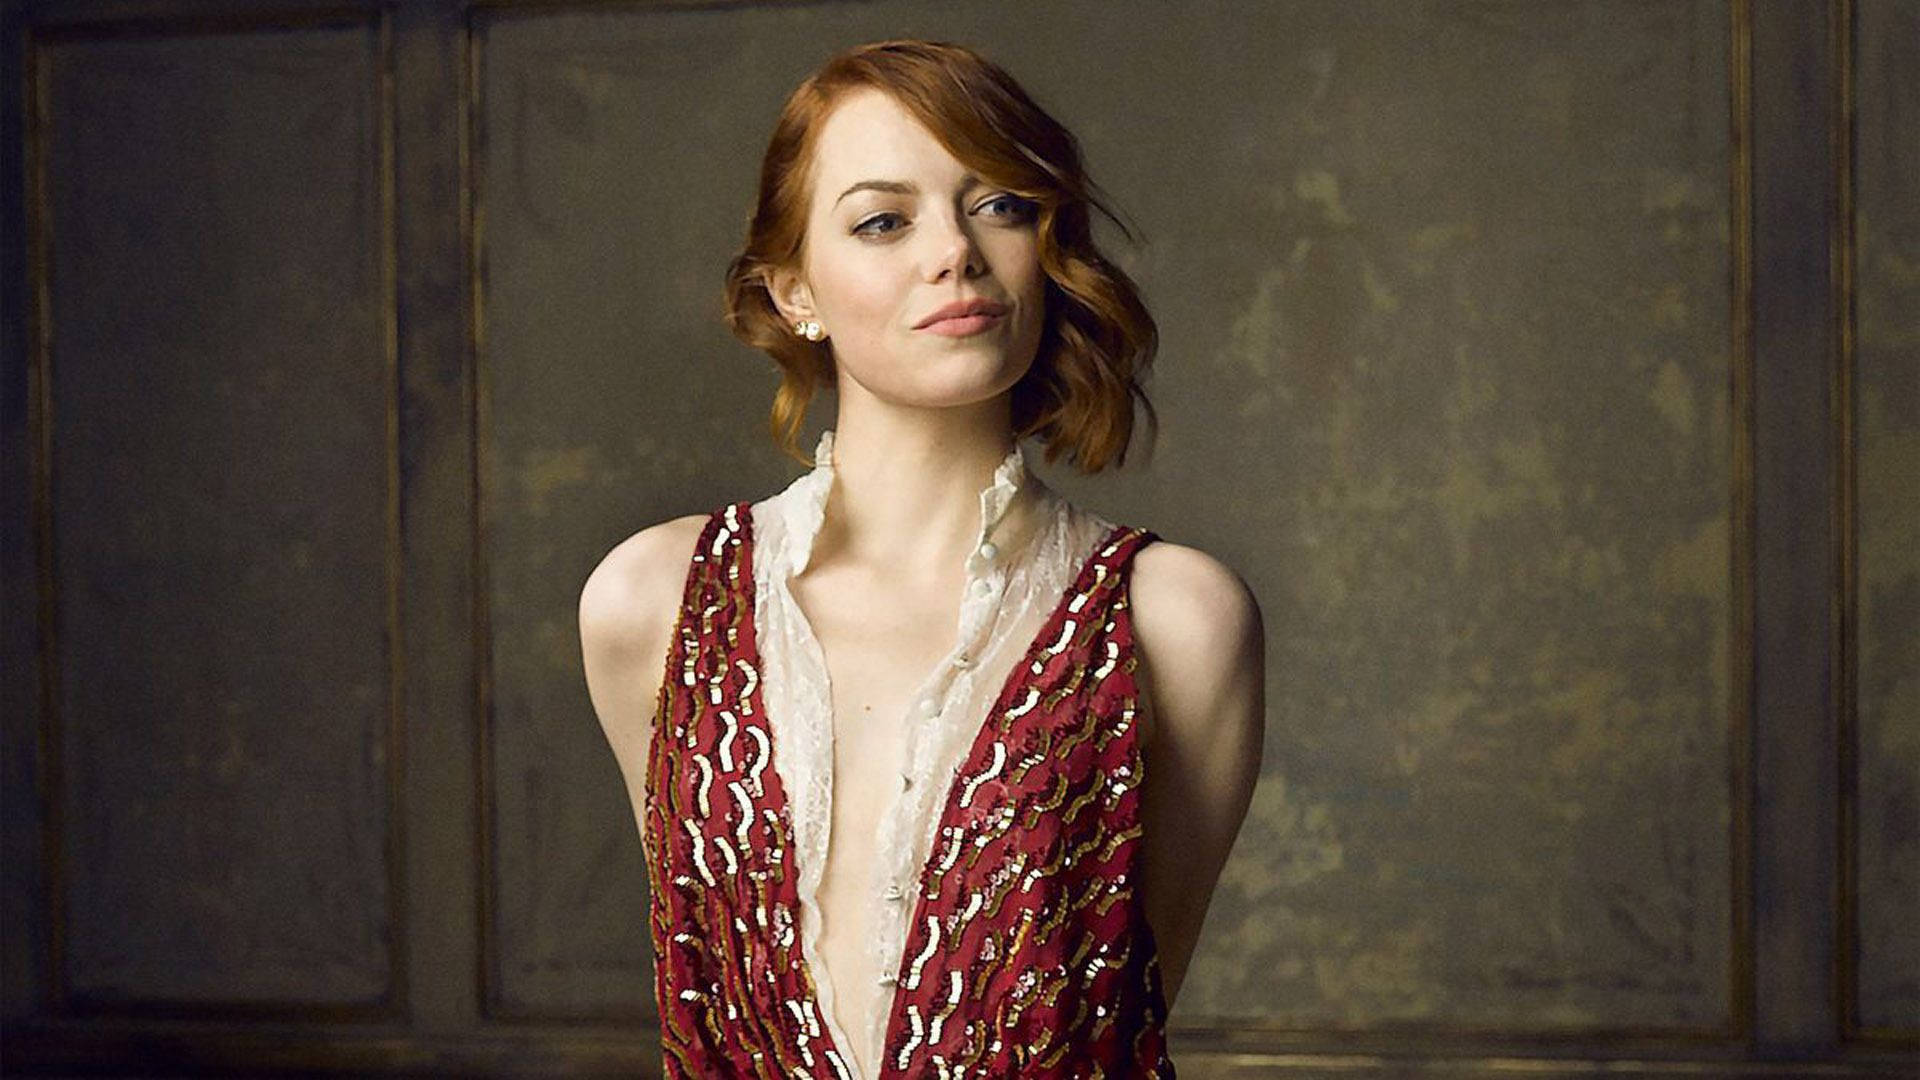 Sexy and classic Emma Stone in a red and white dress wallpaper.